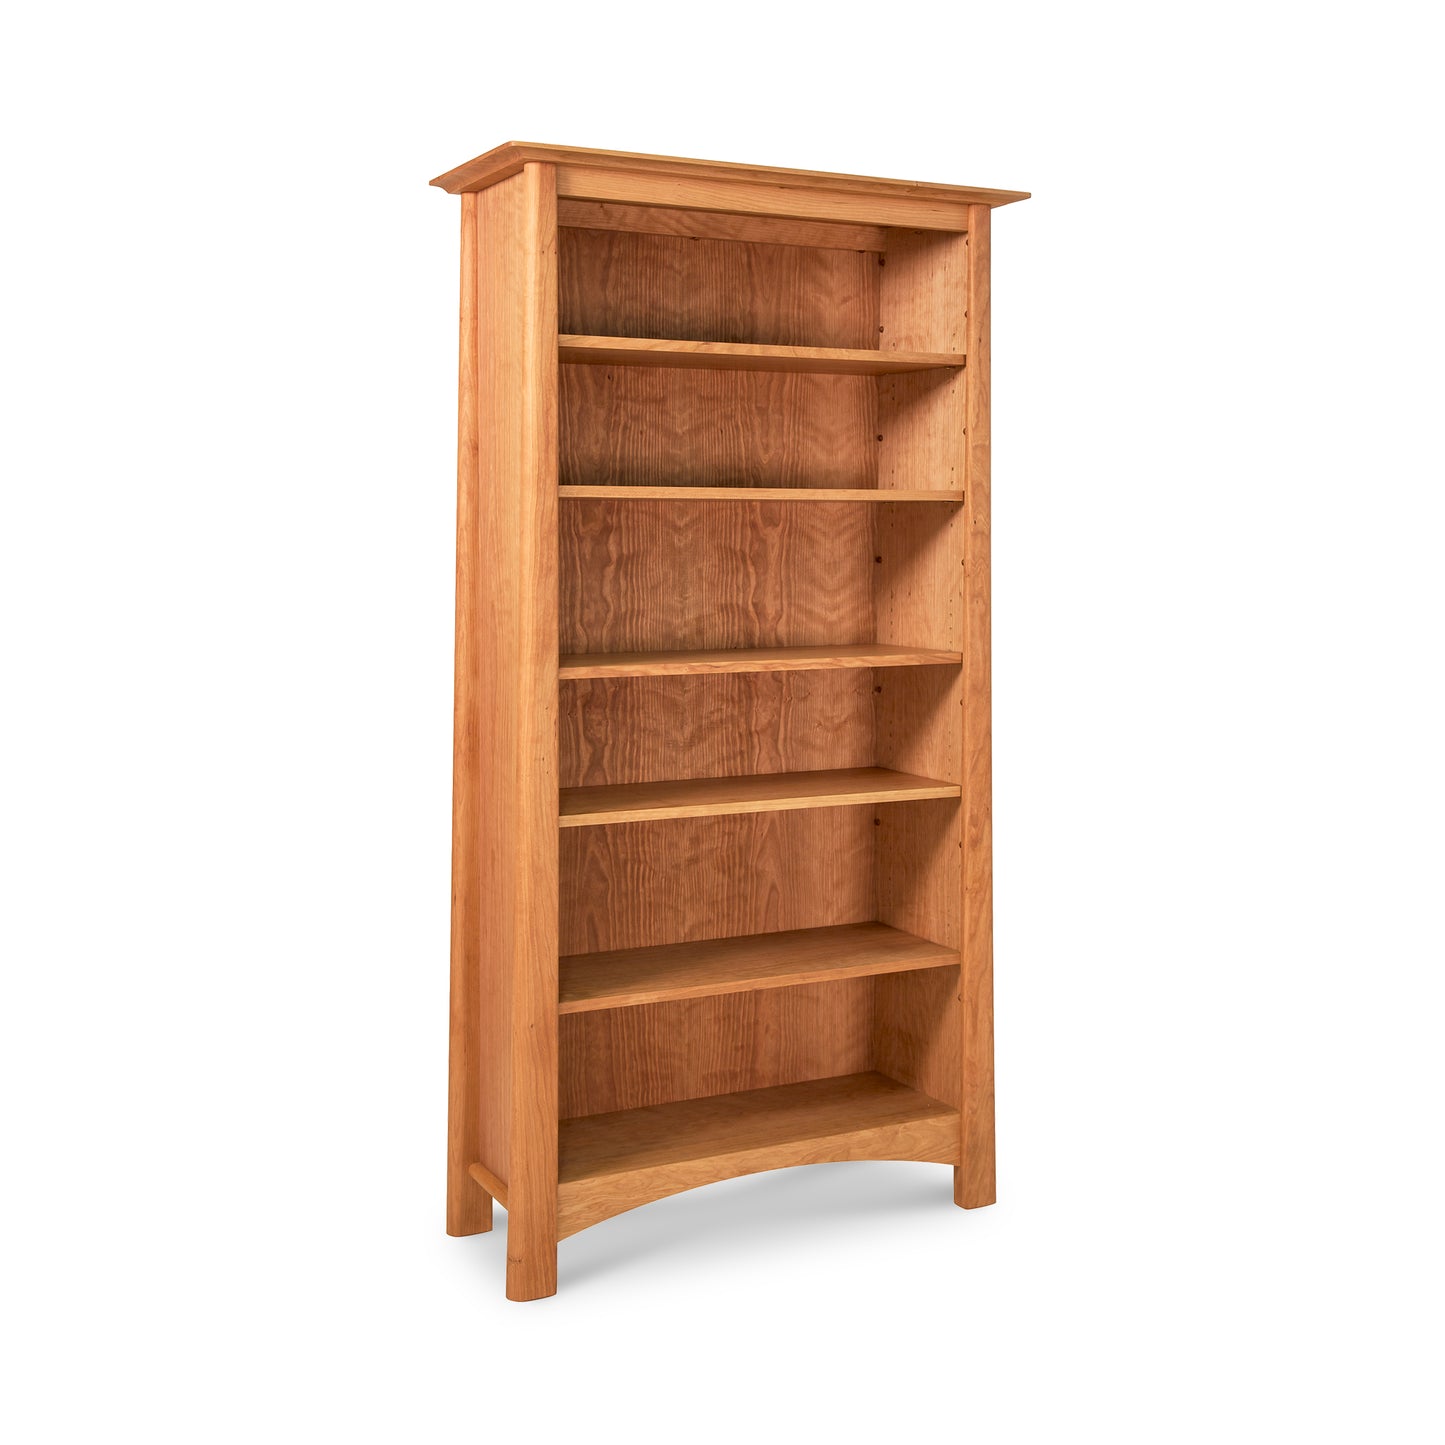 Maple Corner Woodworks Cherry Moon Bookcase with six shelves, isolated on a white background.